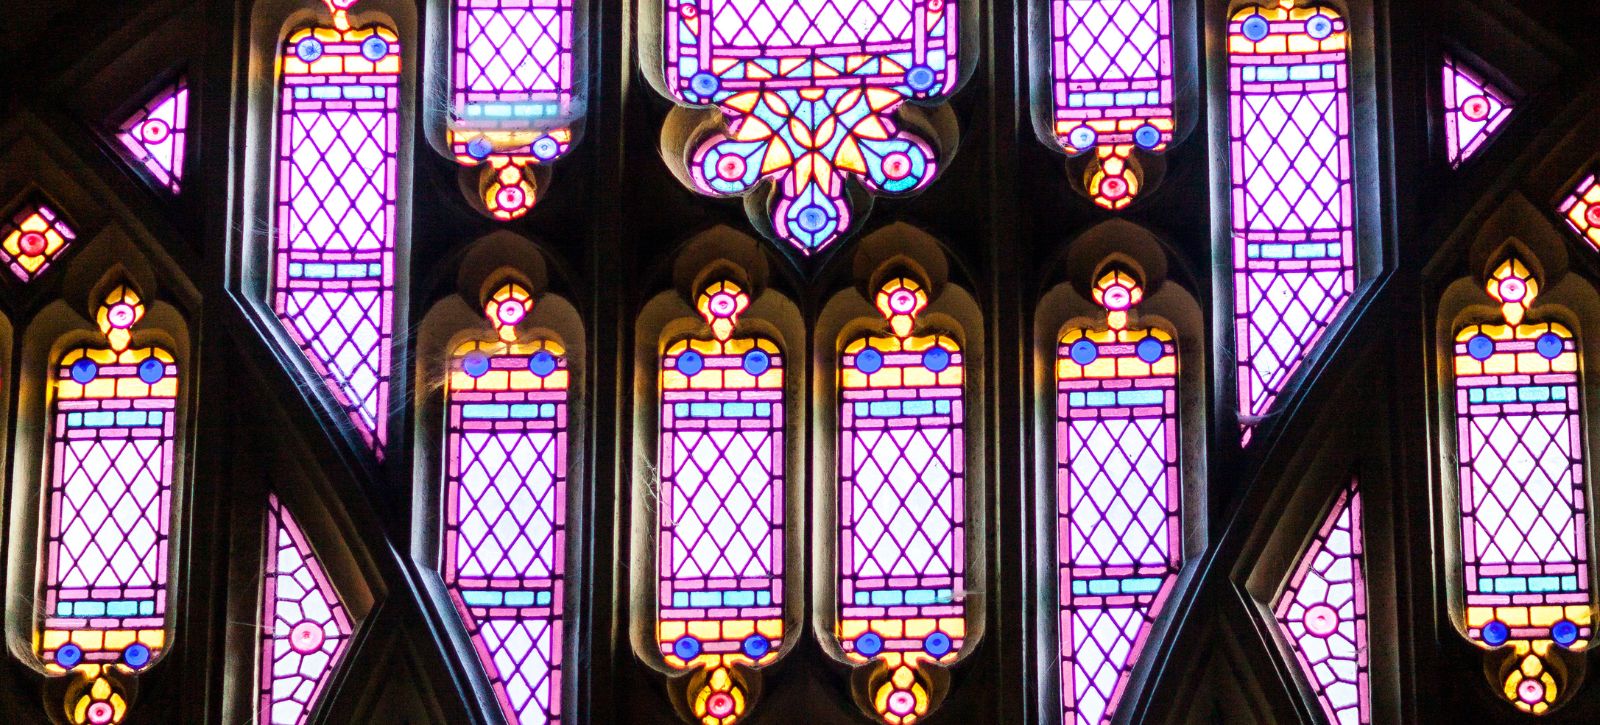 Light coming through stained glass window at The Church